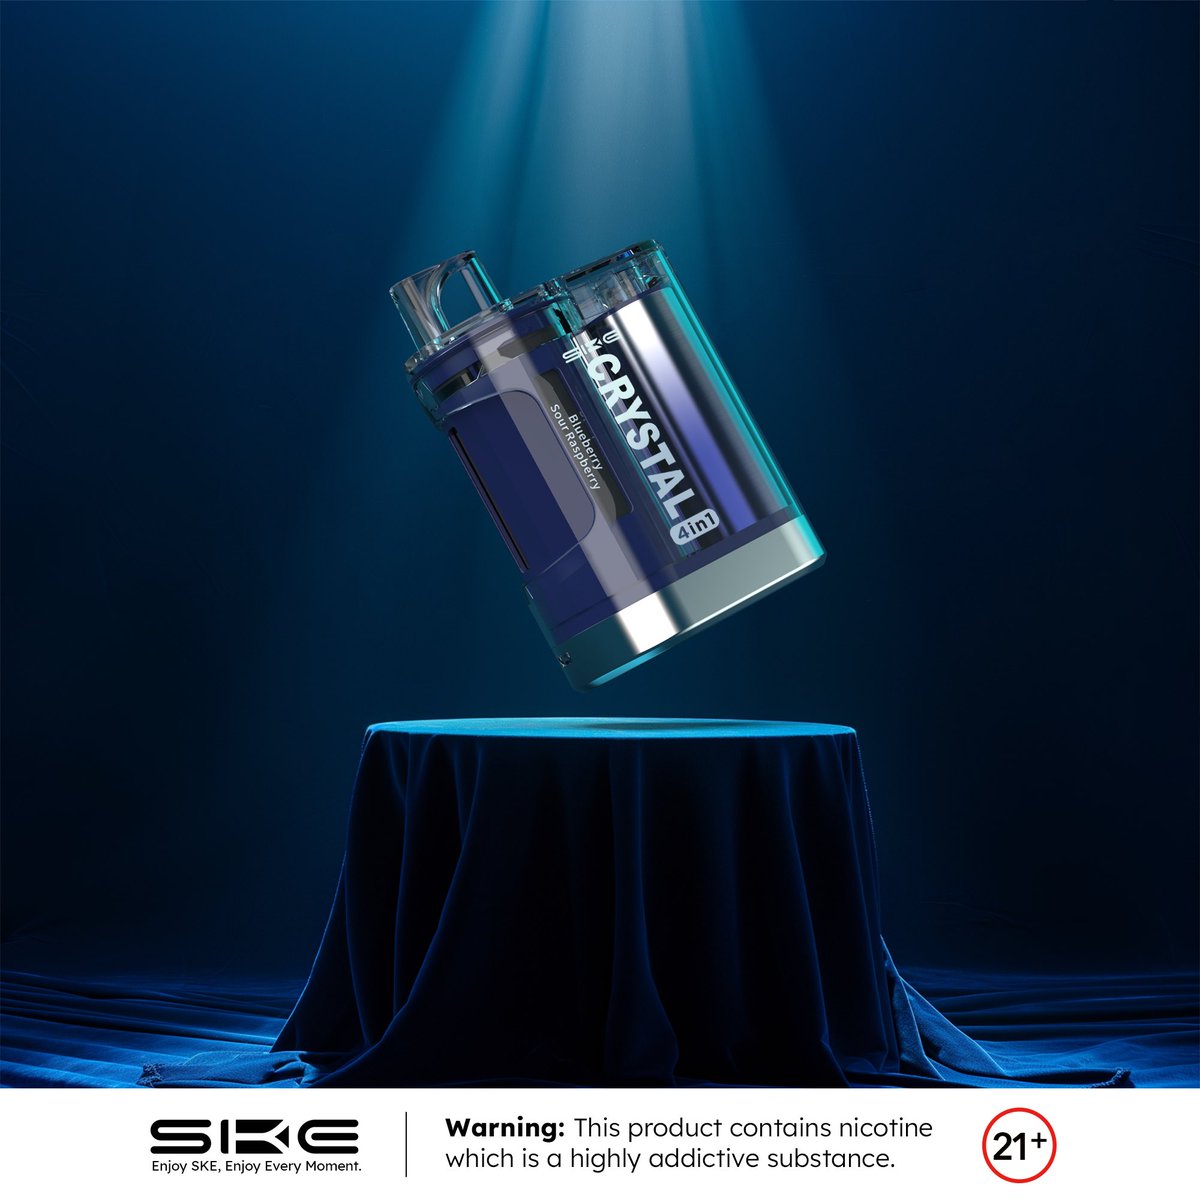 💫💖The whole world is coming for you, and you're about to slay with our dazzling designs and brilliant craftsmanship. 

 Warning: This product contains nicotine which is a highly addictive substance. You must be 21+
#skecrystal4in1 #skecrystal #vapers #Vapeus